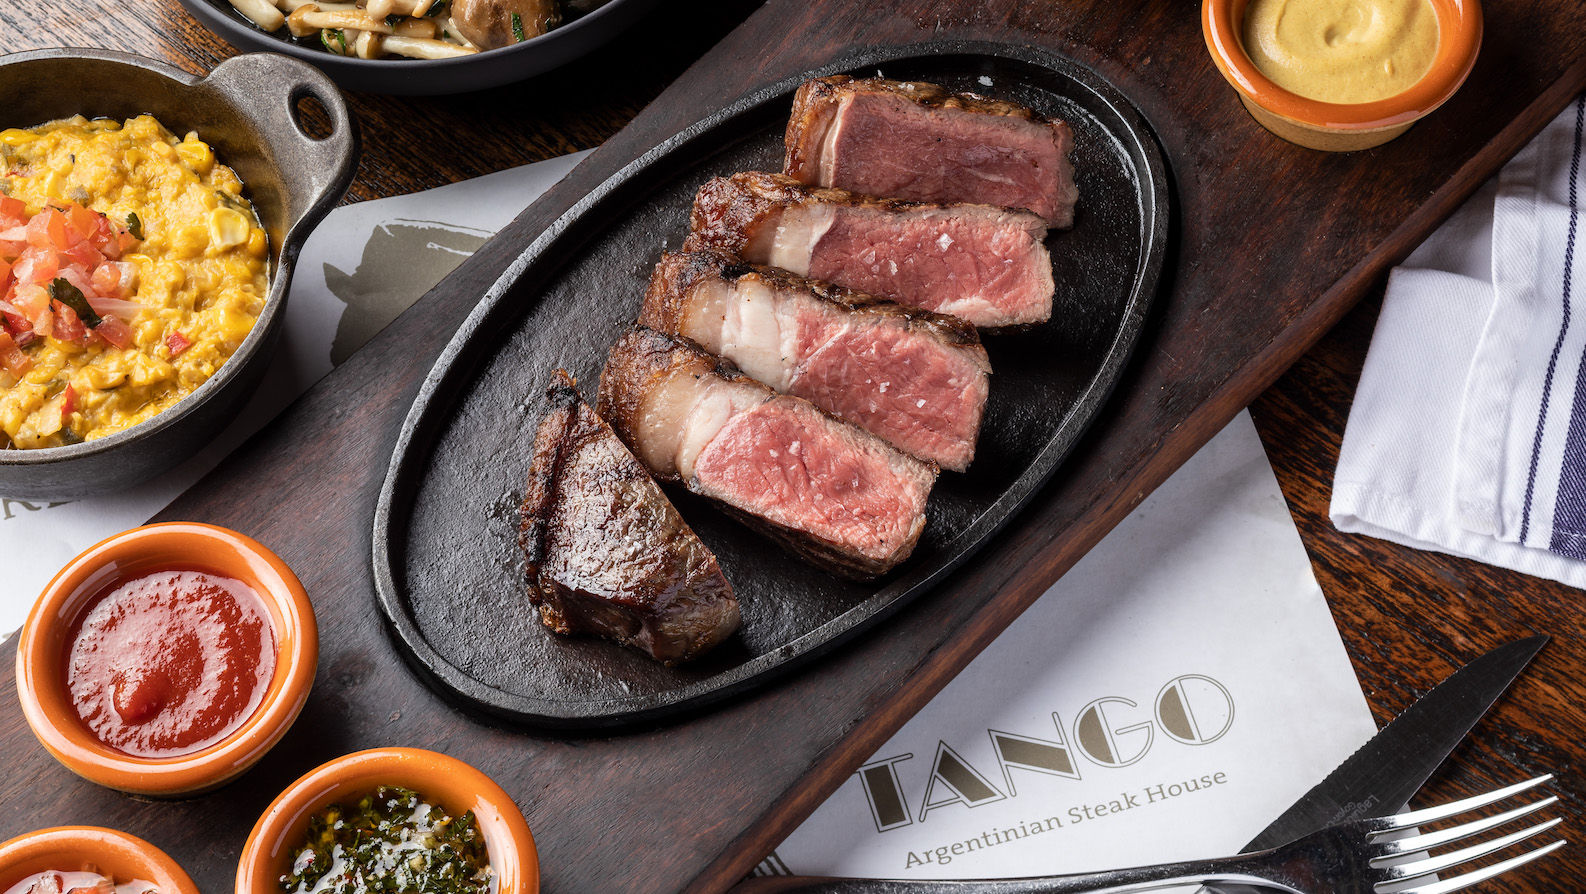 Tango launches new business set lunch for Argentinian steak lovers